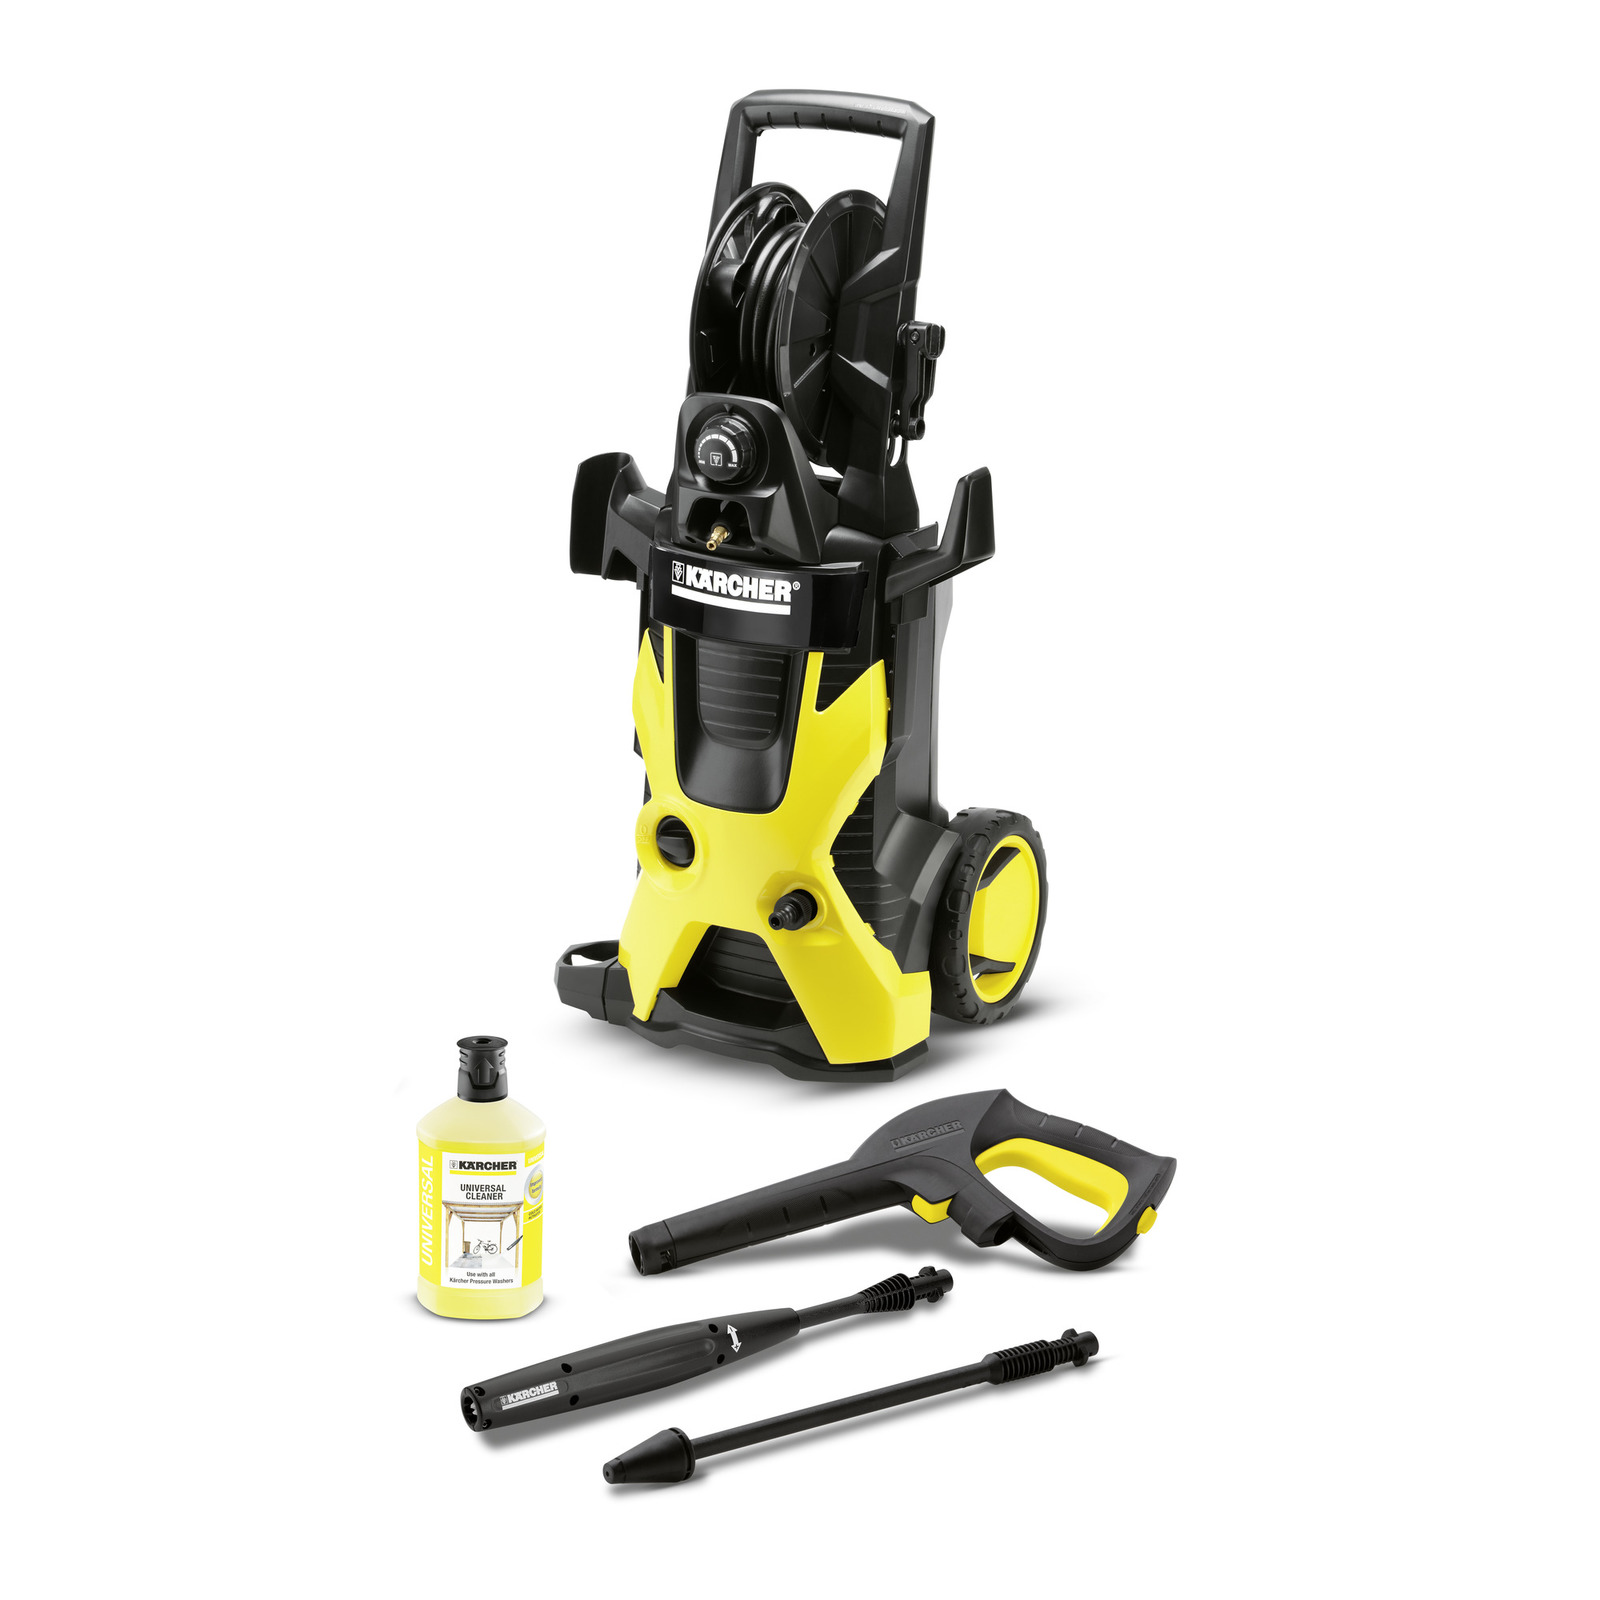 Karcher K 5 Premium High Pressure Washer - Direct Cleaning Solutions